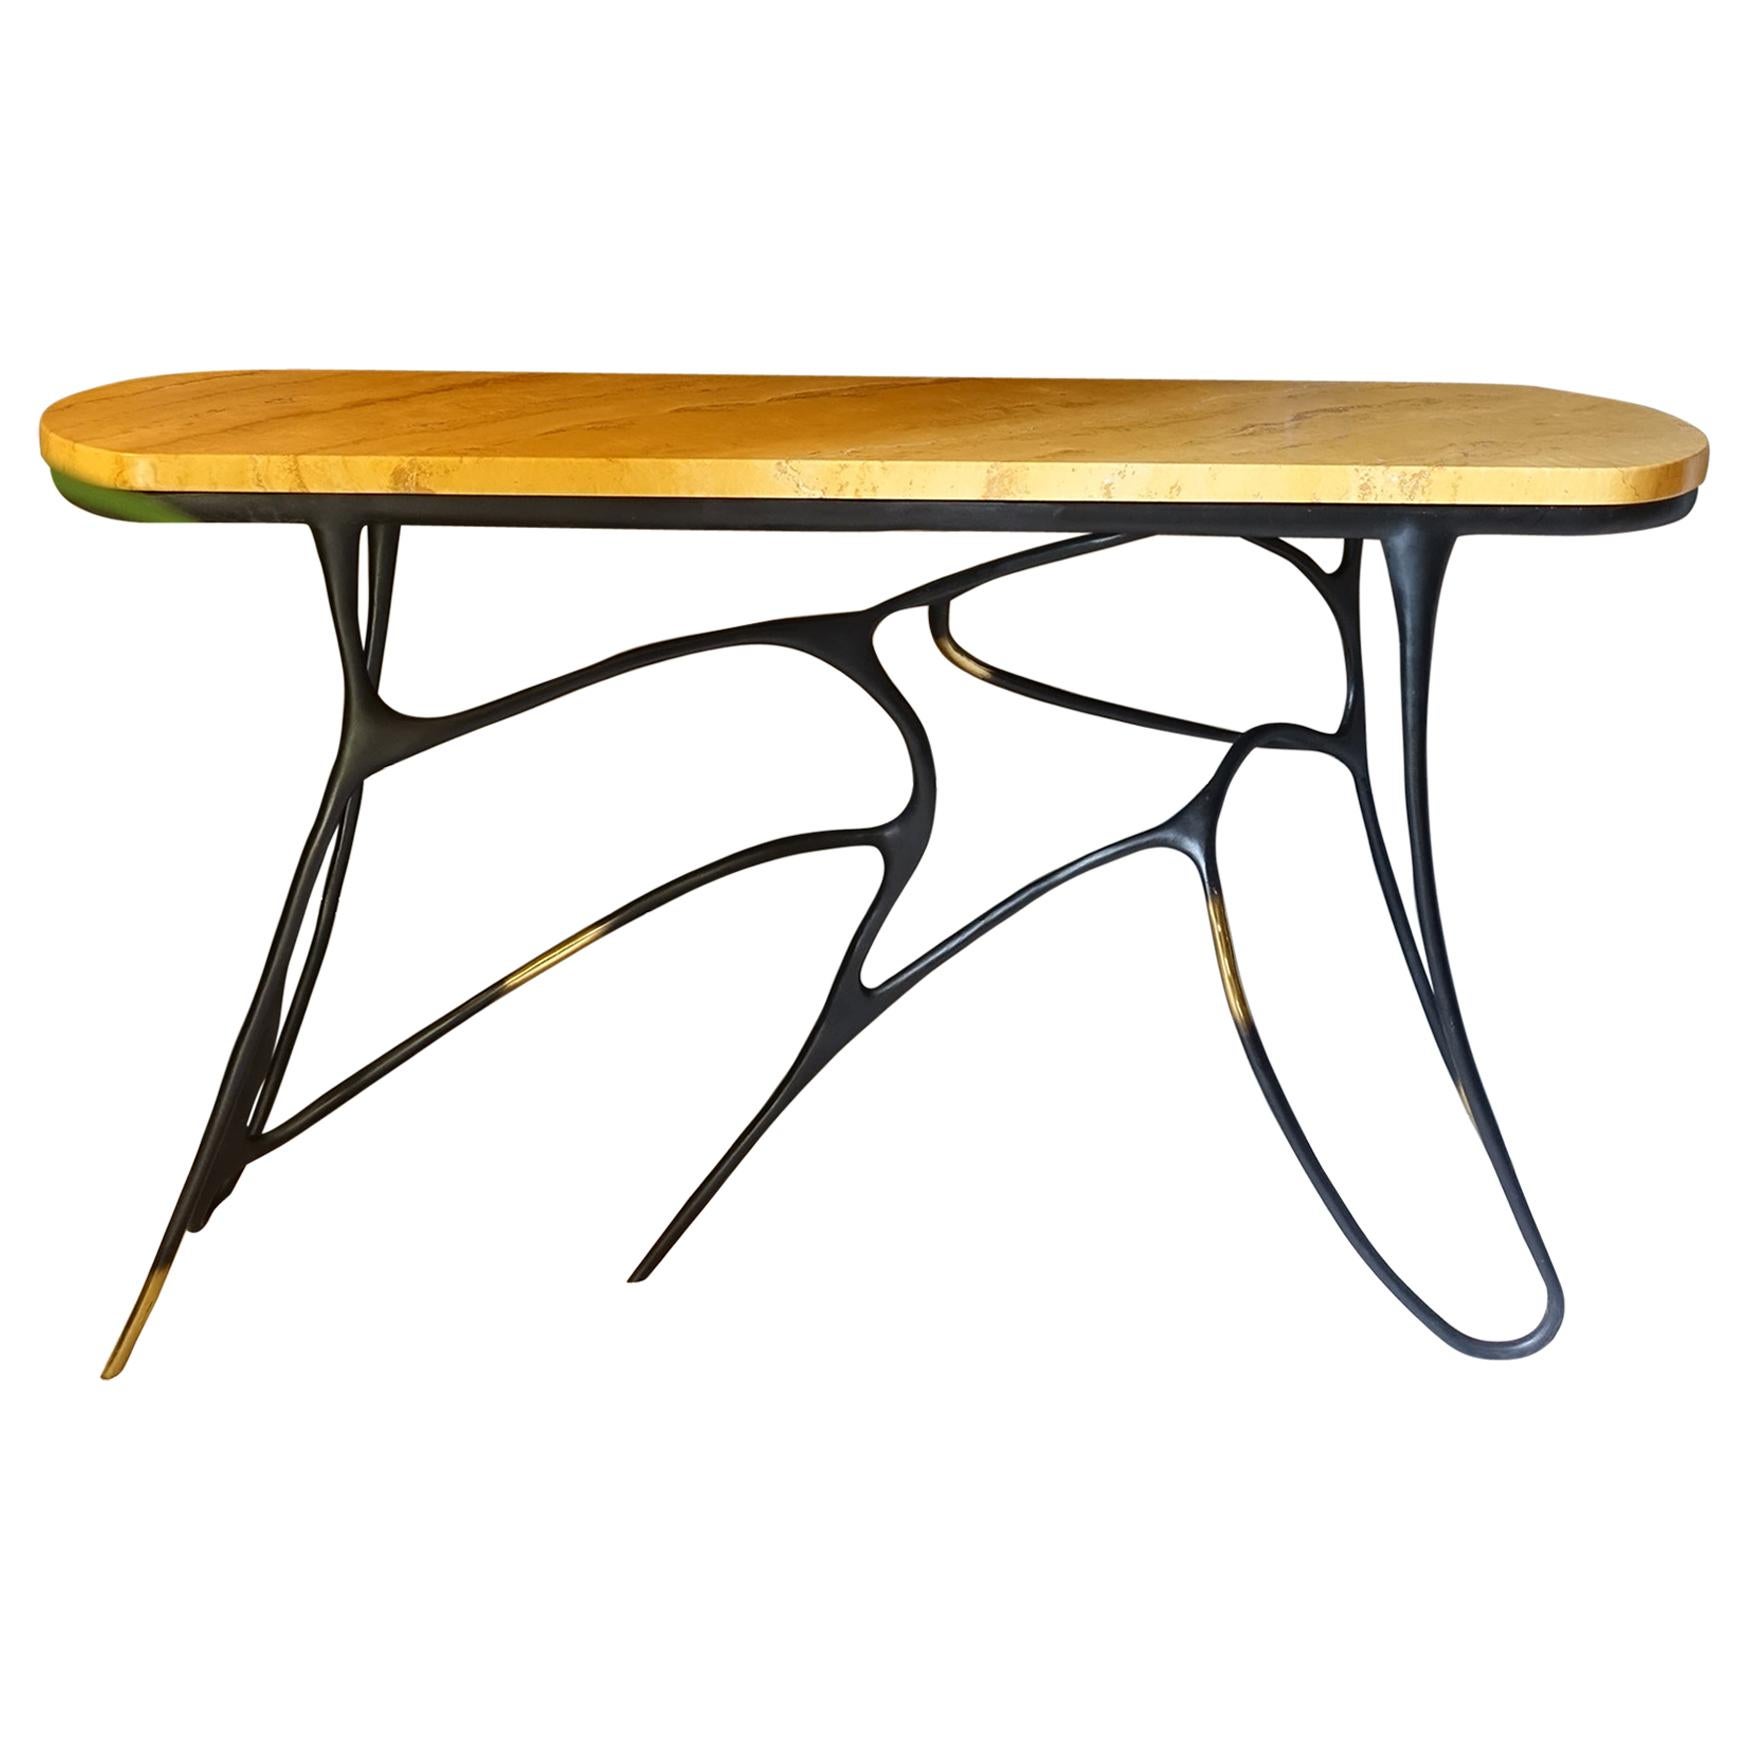 Contemporary Sculptural Black Brass Console, Turkish Yellow Marble Top